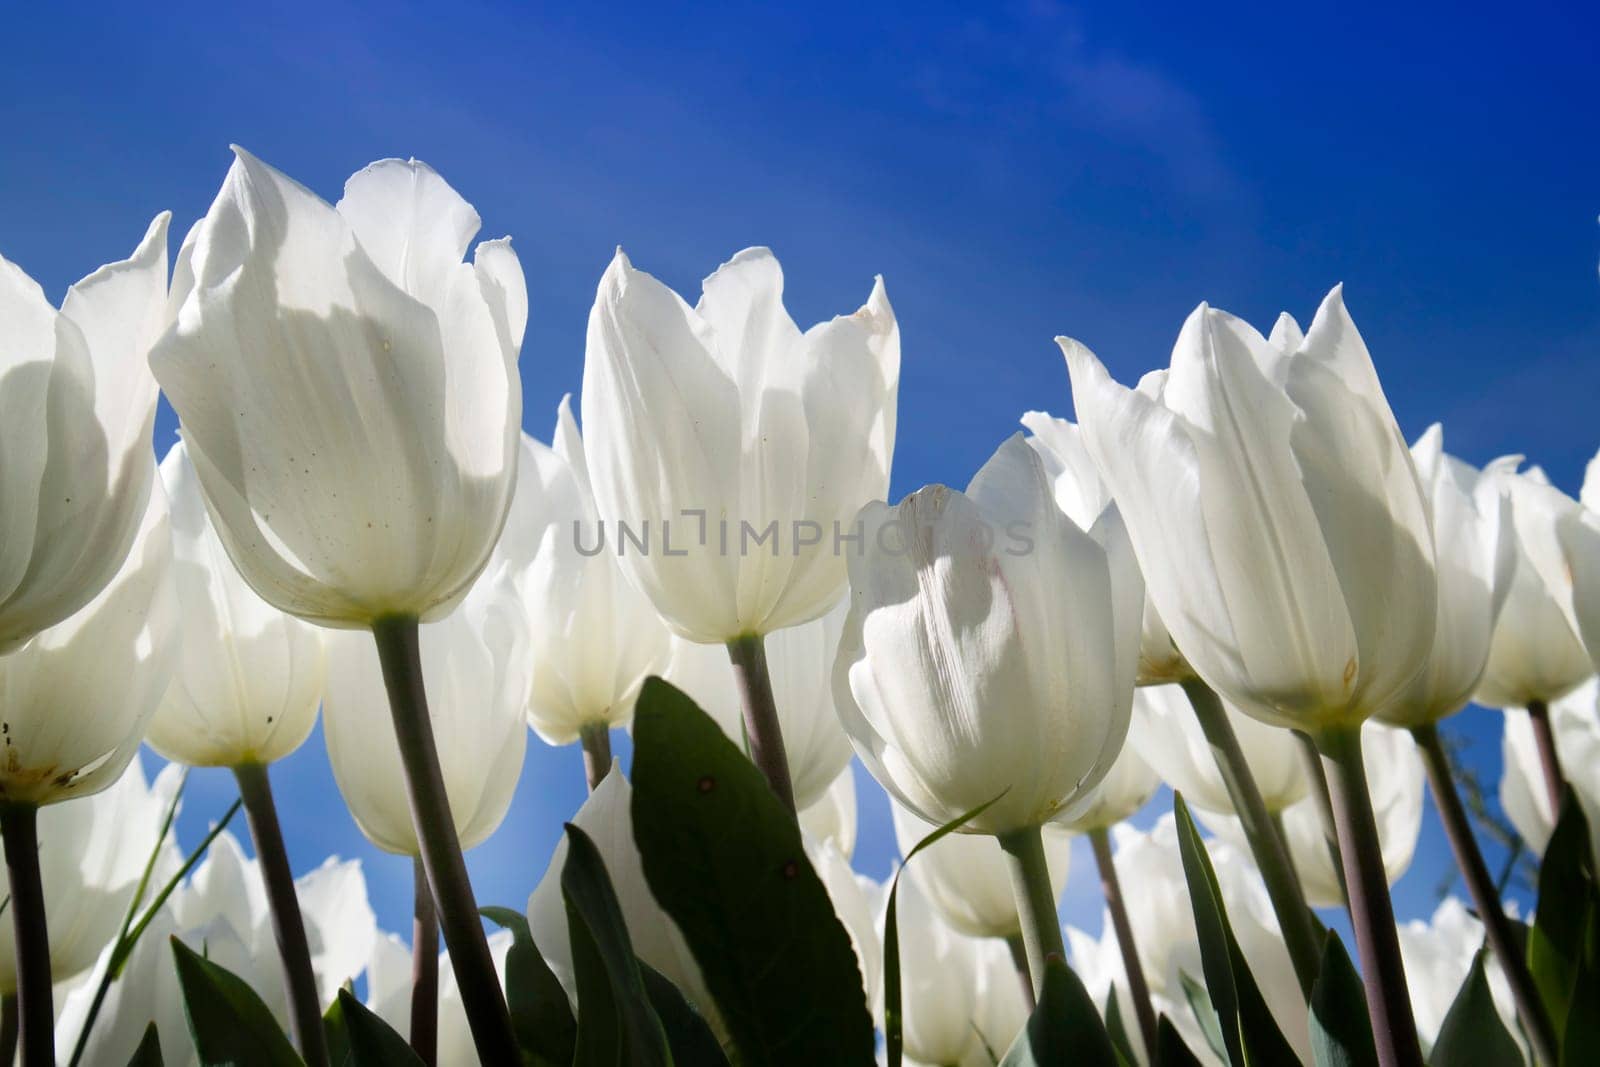 Photographic documentation of the field cultivation of the white tulip 